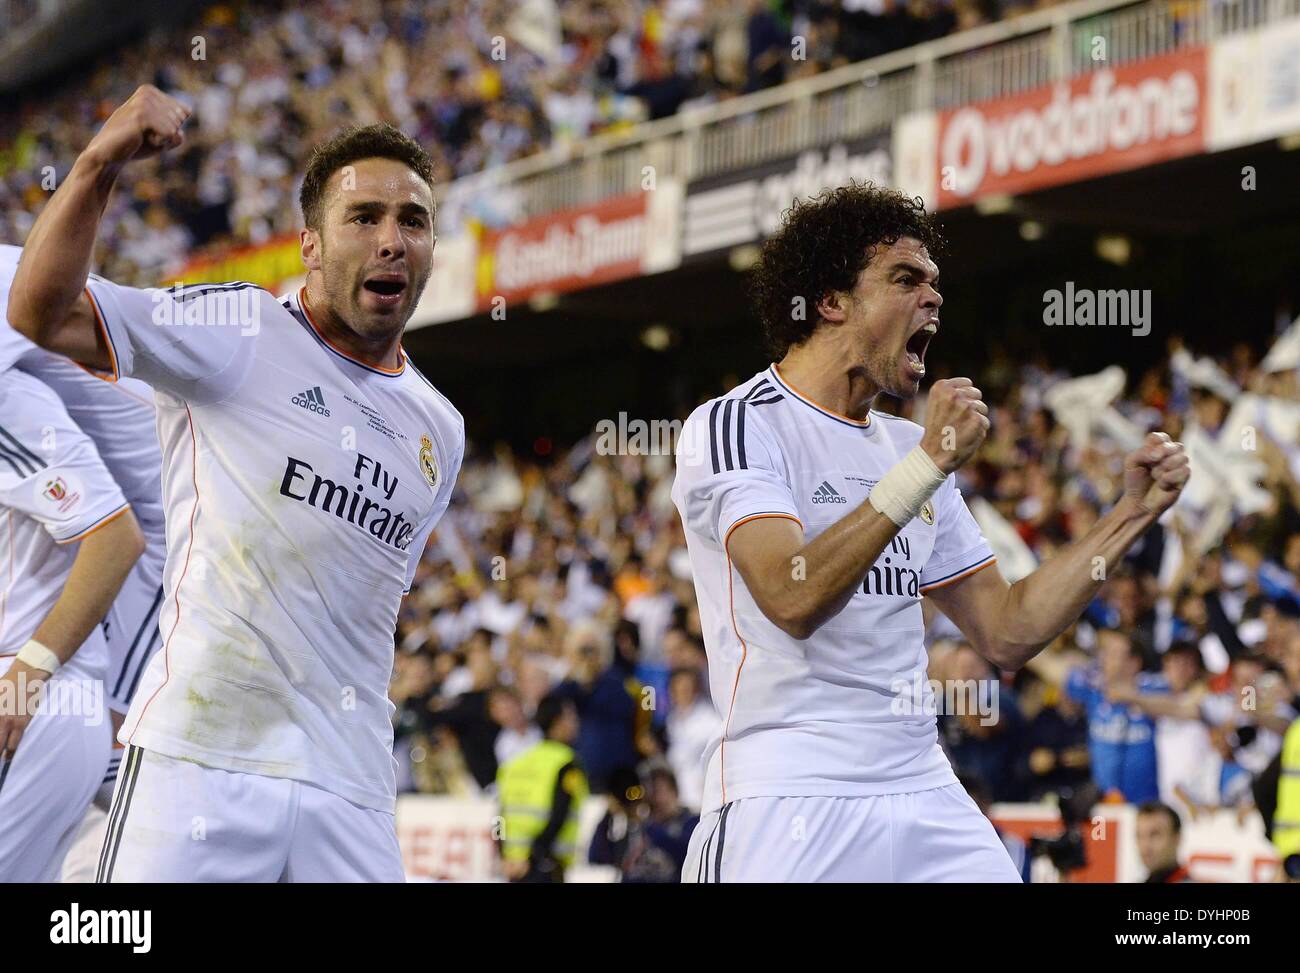 Mestalla, Valencia, Spain. 16th Apr, 2014. Copa Del Rey Cup final. Barcelona versus Real Madrid. Daniel Carvajal and Pepe © Action Plus Sports/Alamy Live News Stock Photo